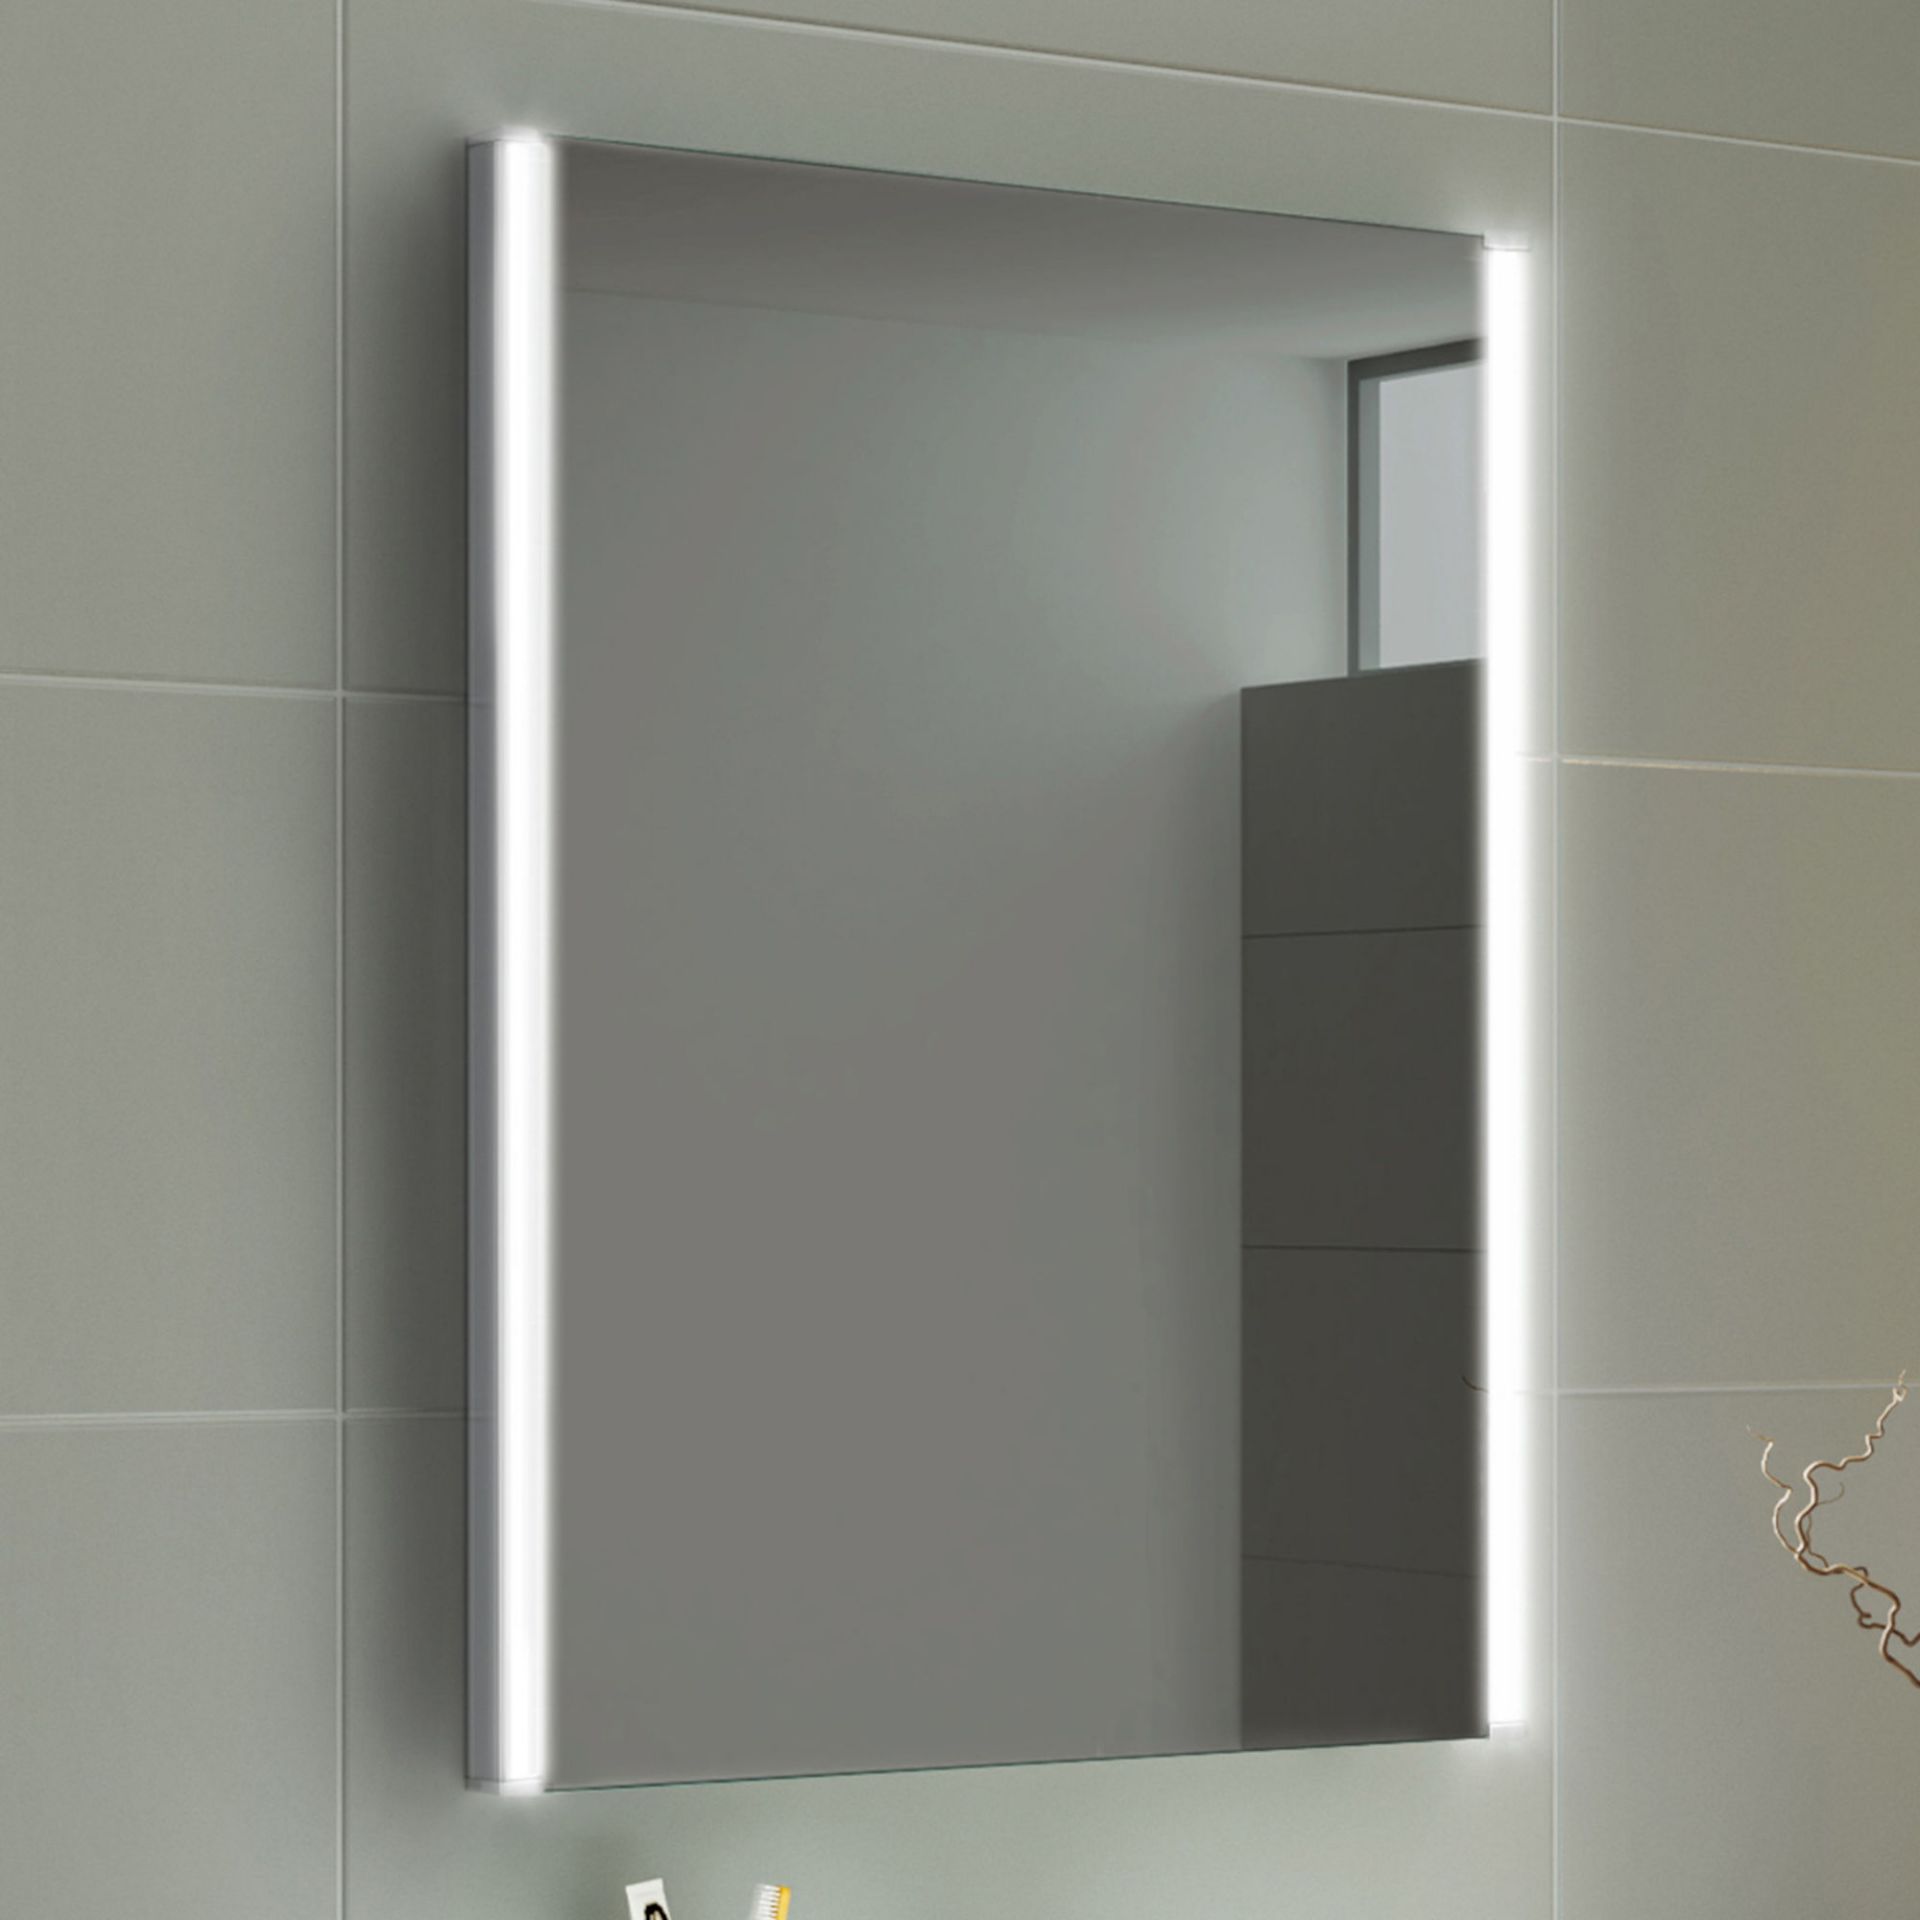 (ZL289) 500x700mm Denver Illuminated LED Mirror - Battery Operated. Energy saving controlled On /